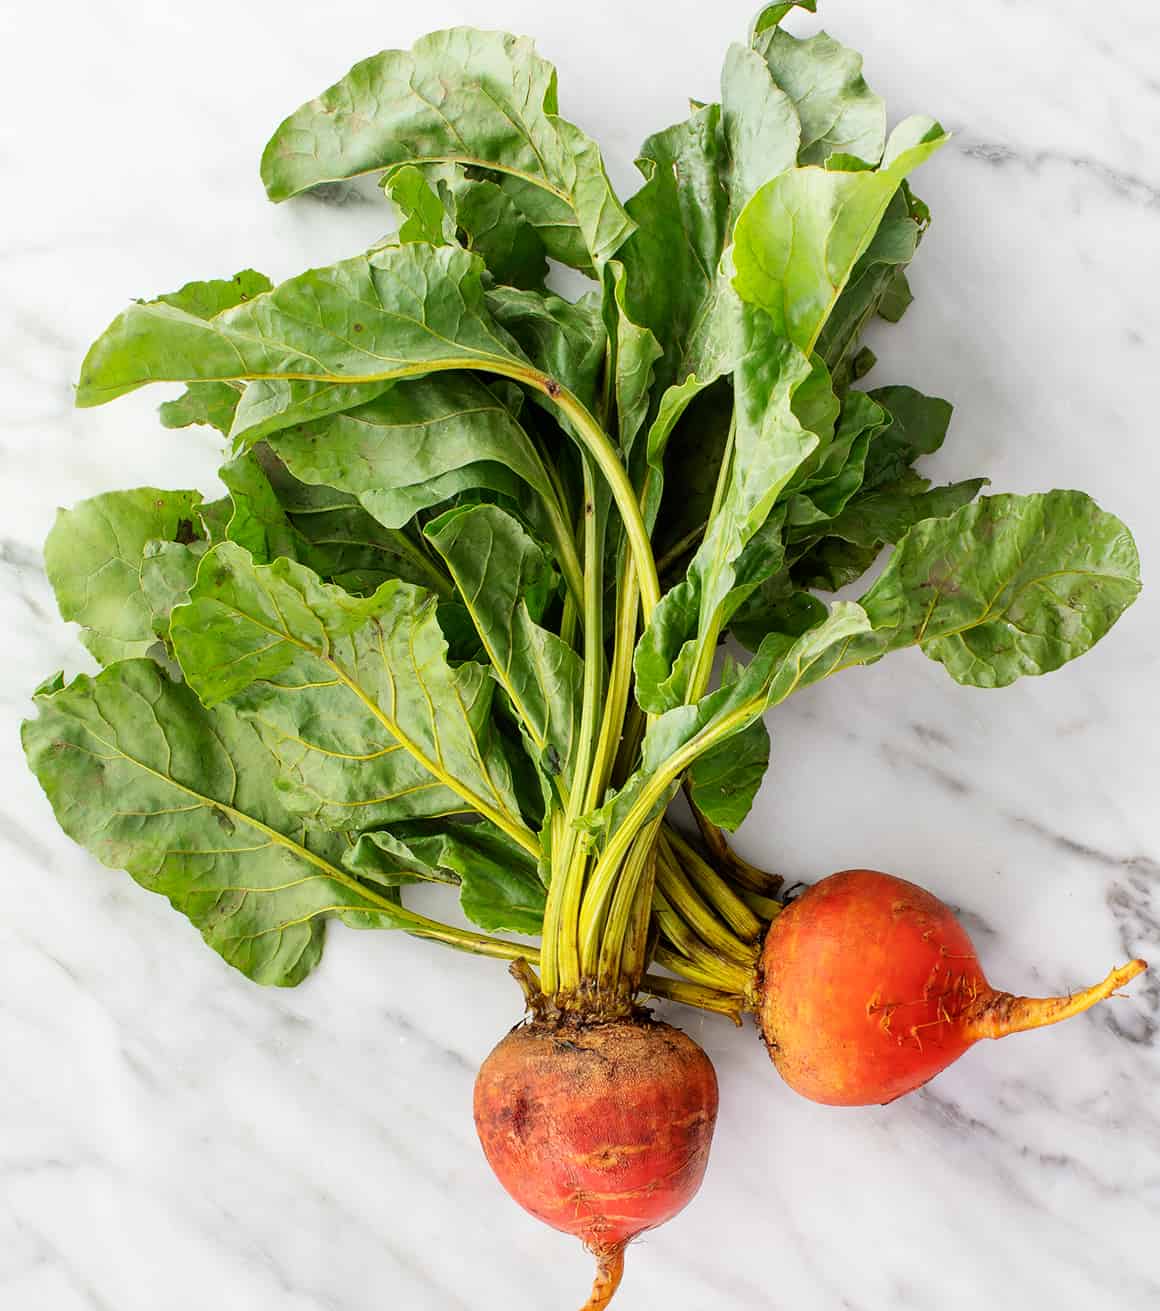 golden beets and beet greens